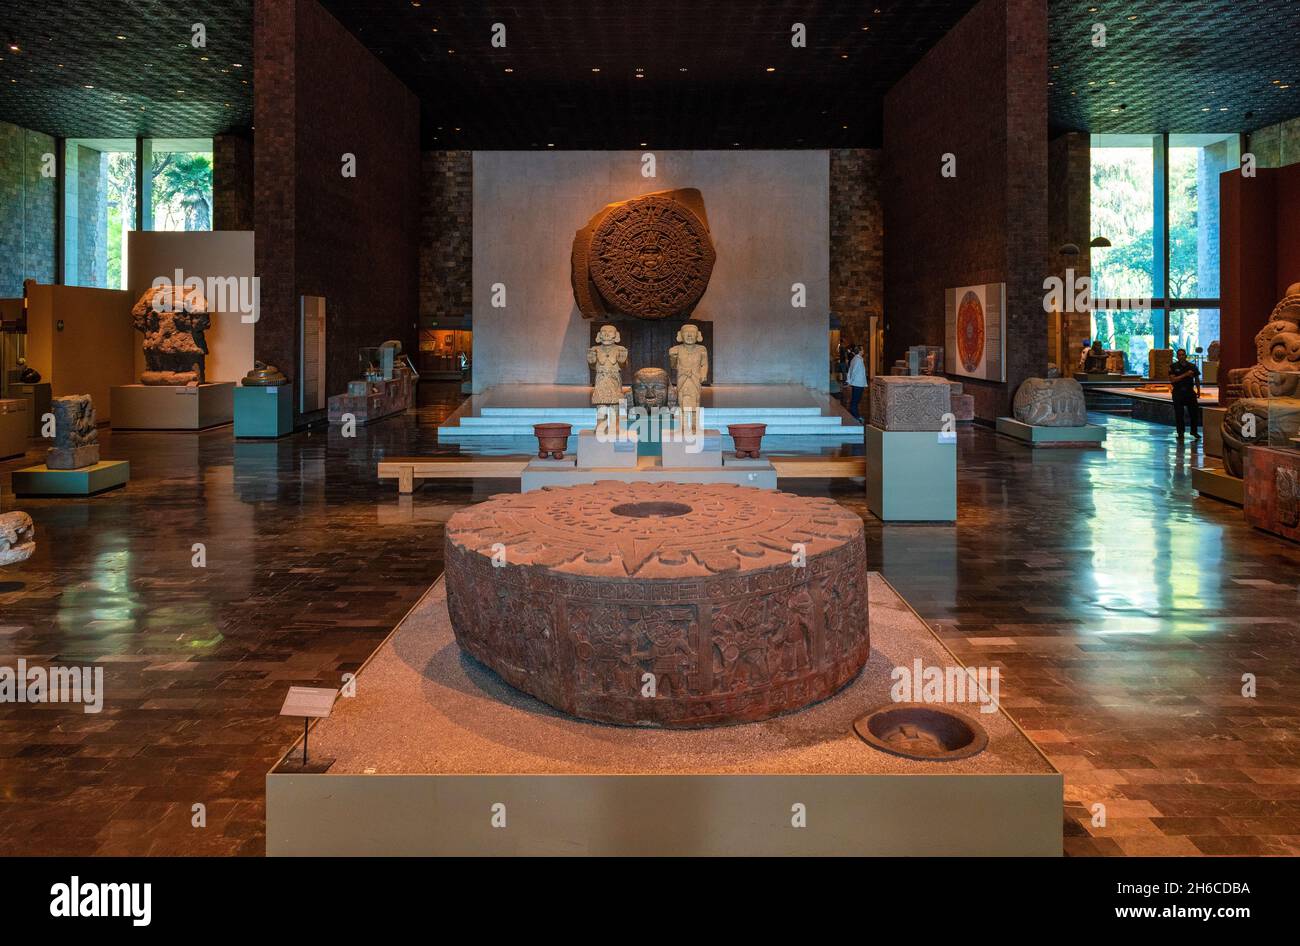 Interior of the Antrhopology Museum with Aztec archaeology objects and the Aztec sun calendar in the background, Mexico City, Mexico. Stock Photo